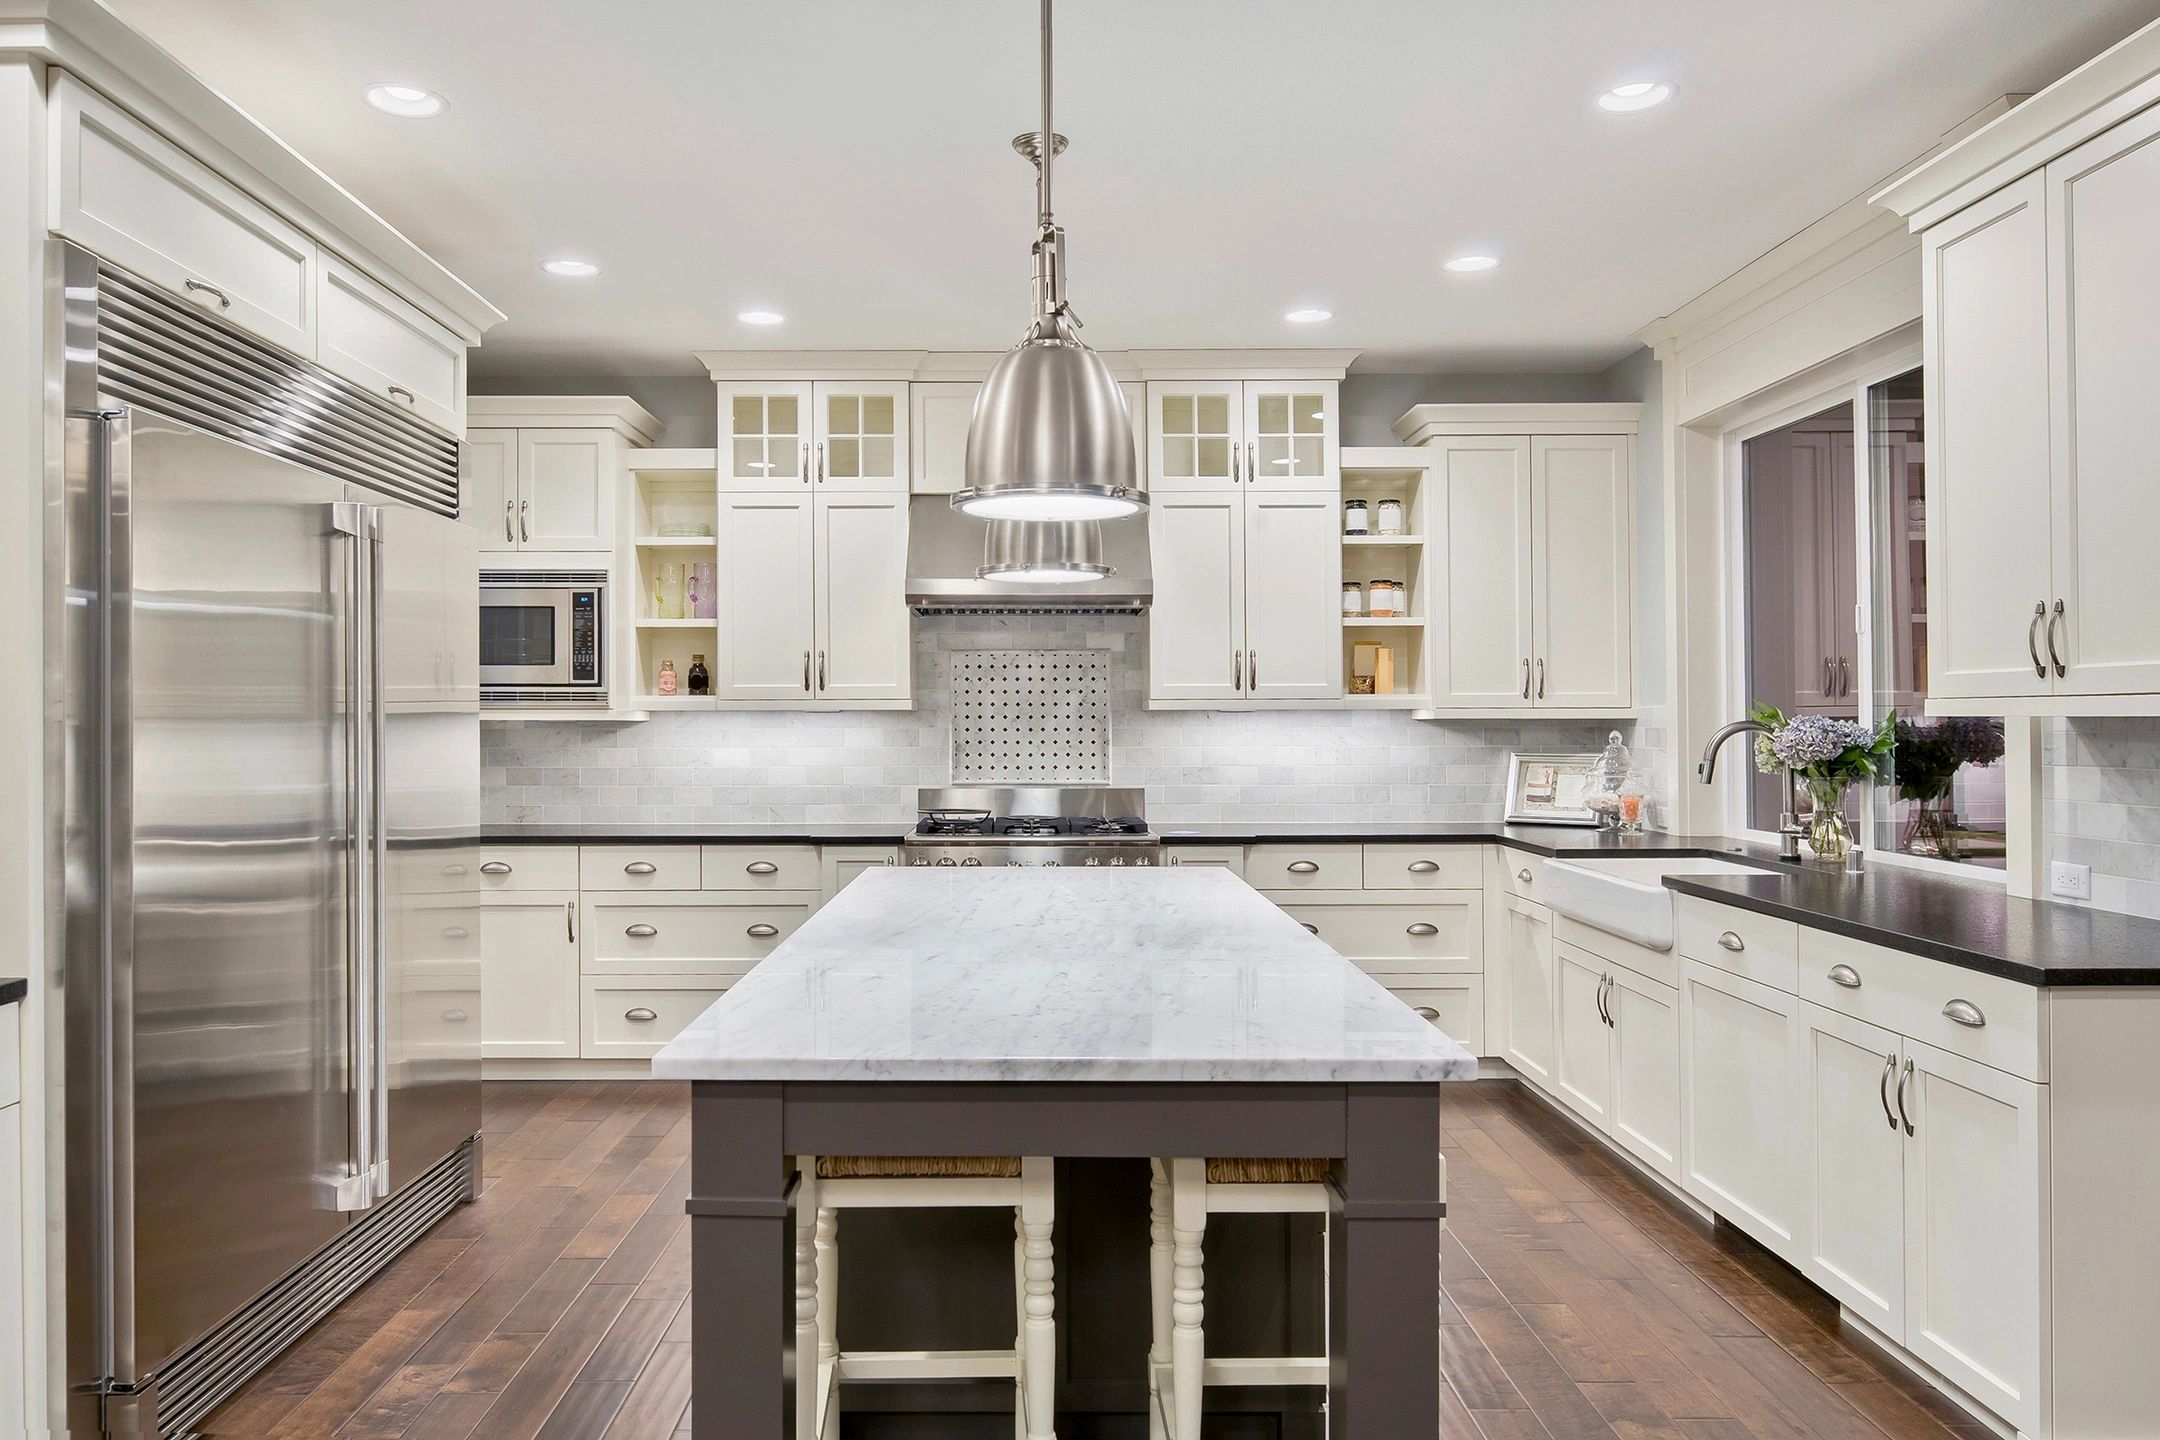 Contrasting stone countertops. Dark and light stone adds drama and sophistication to any kitchen.